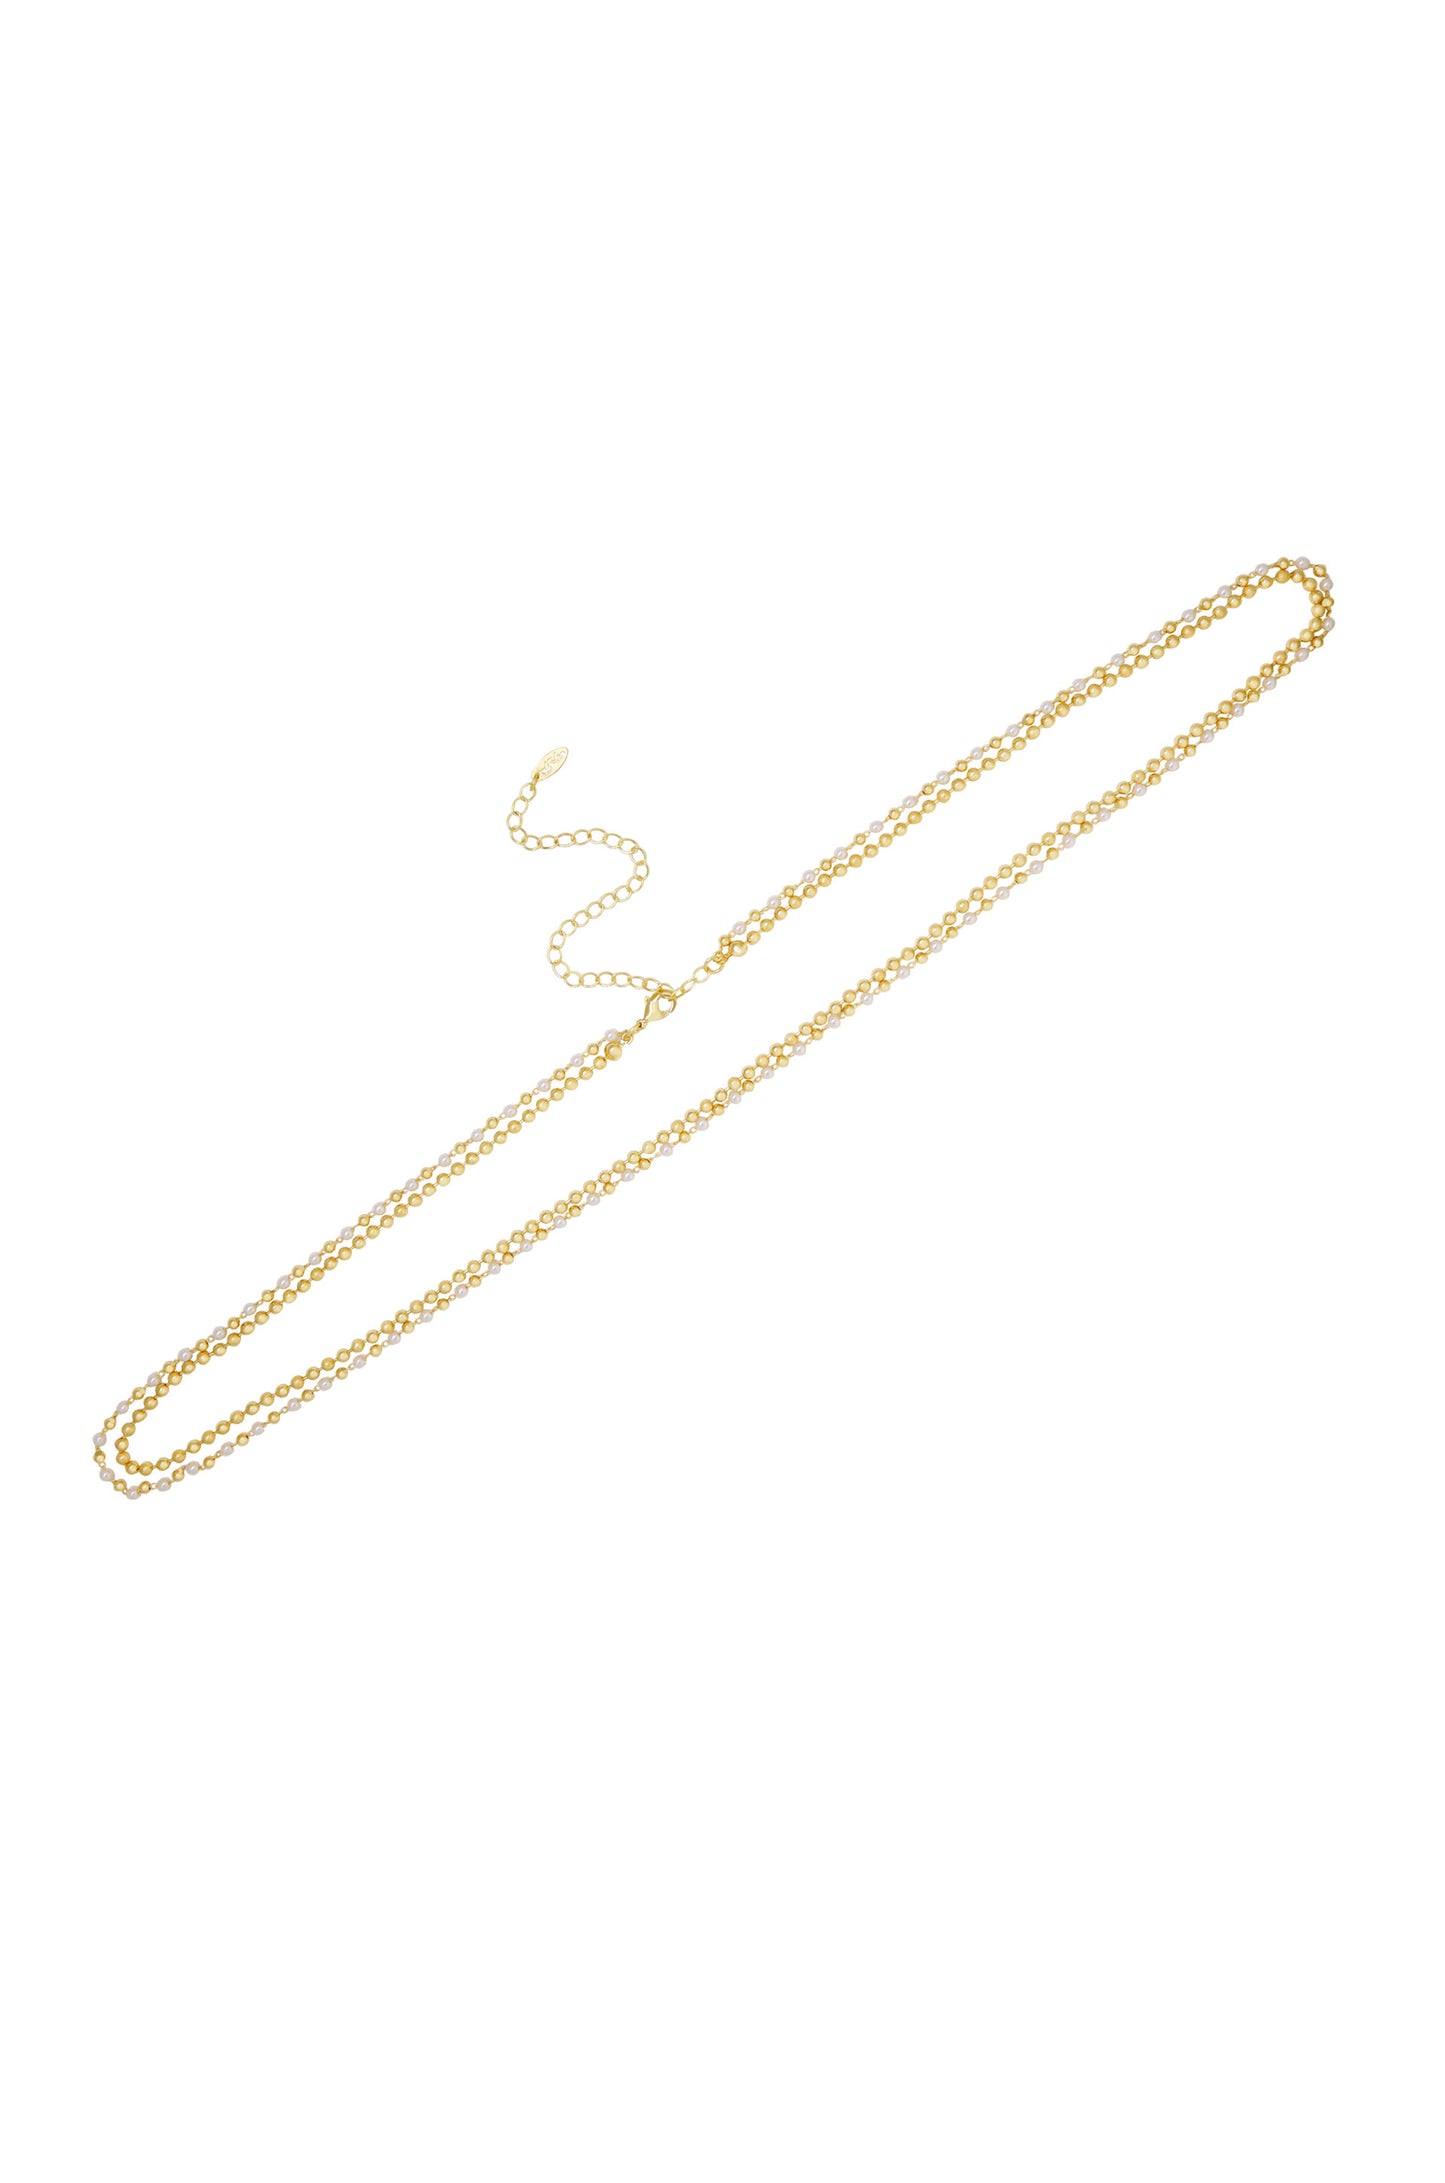 Pearl Strand Gold Body Chain on white background  